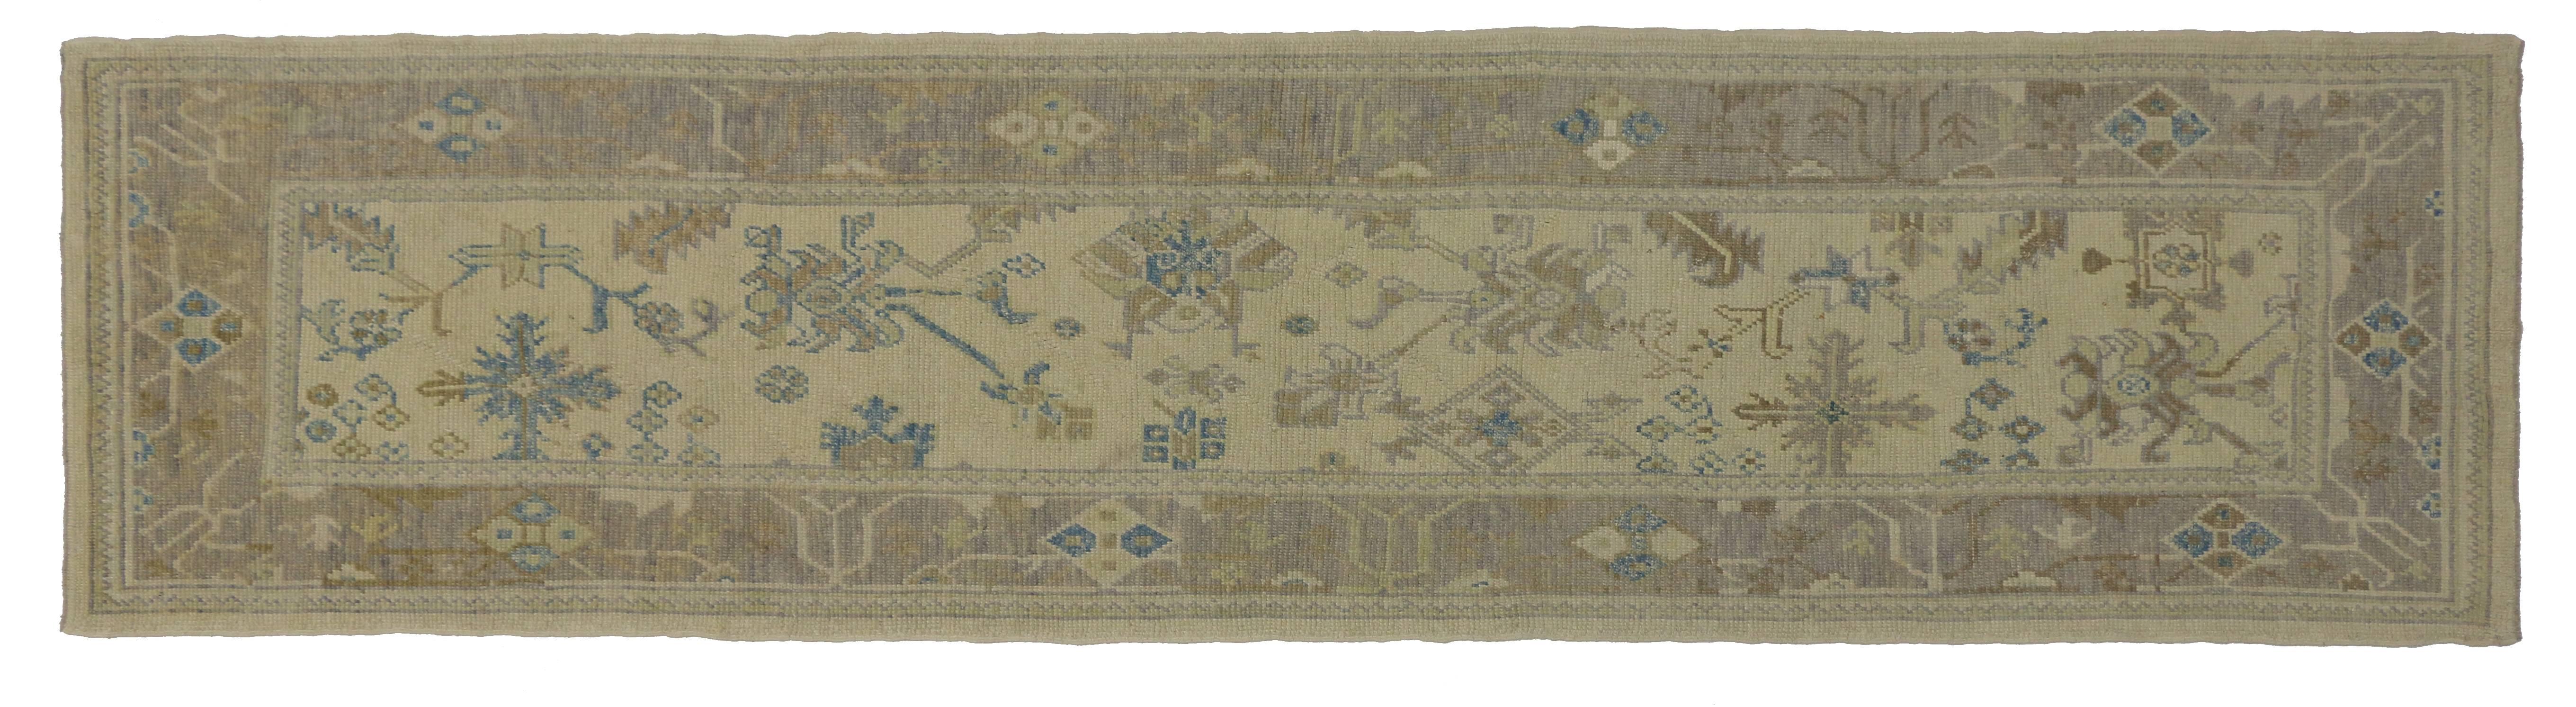 New Transitional Turkish Oushak Runner with Hampton's Chic Coastal Style For Sale 6